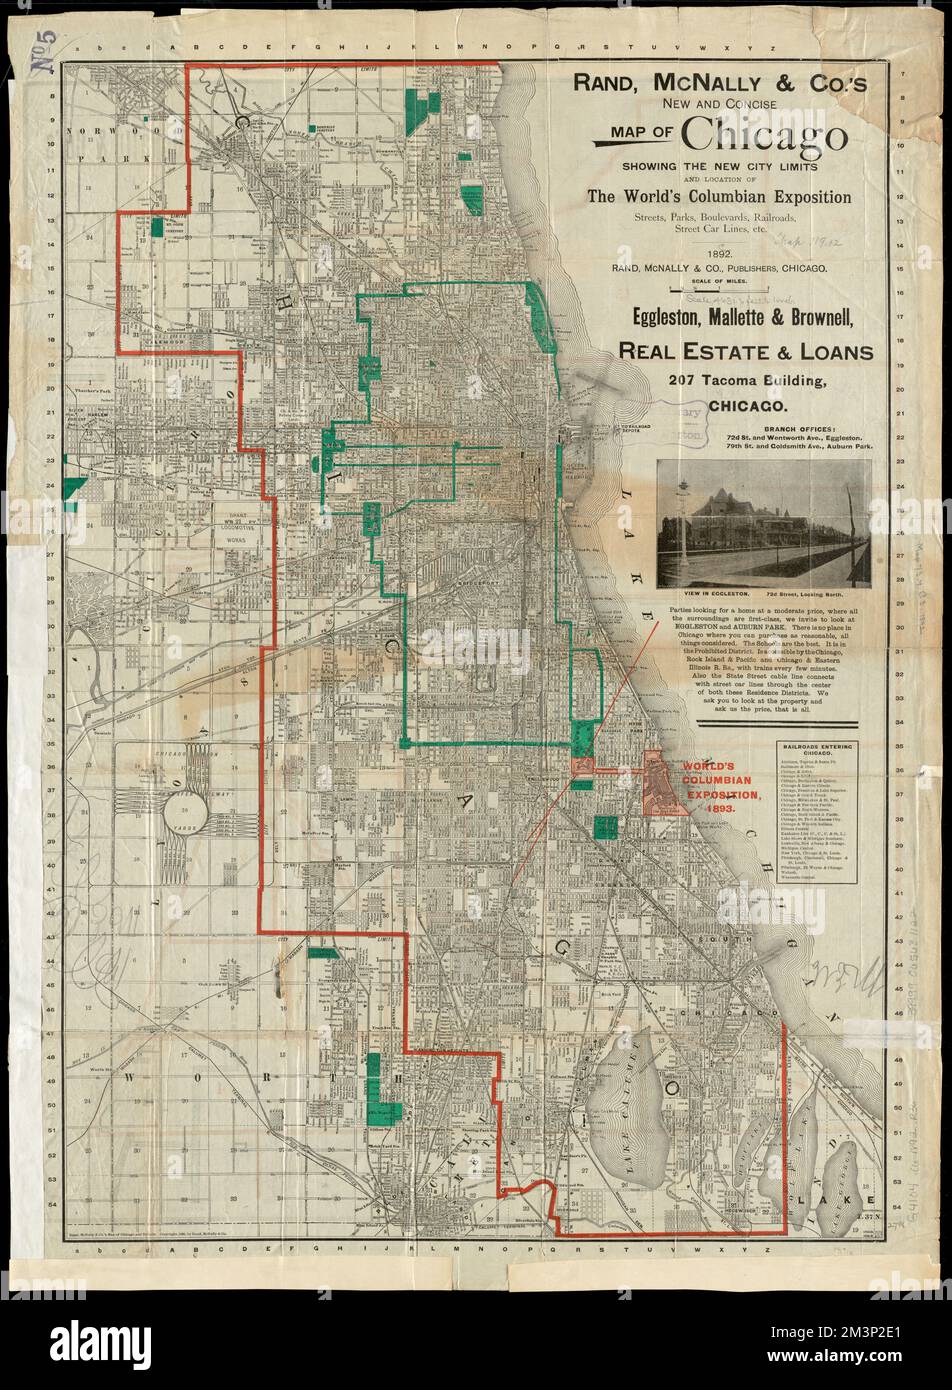 Rand, McNally & Co.'s new and concise map of Chicago : showing the city limits and location of the world's Columbian Exposition, streets, parks, boulevards, railroads, street car lines, etc. , Chicago Ill., Maps Norman B. Leventhal Map Center Collection Stock Photo